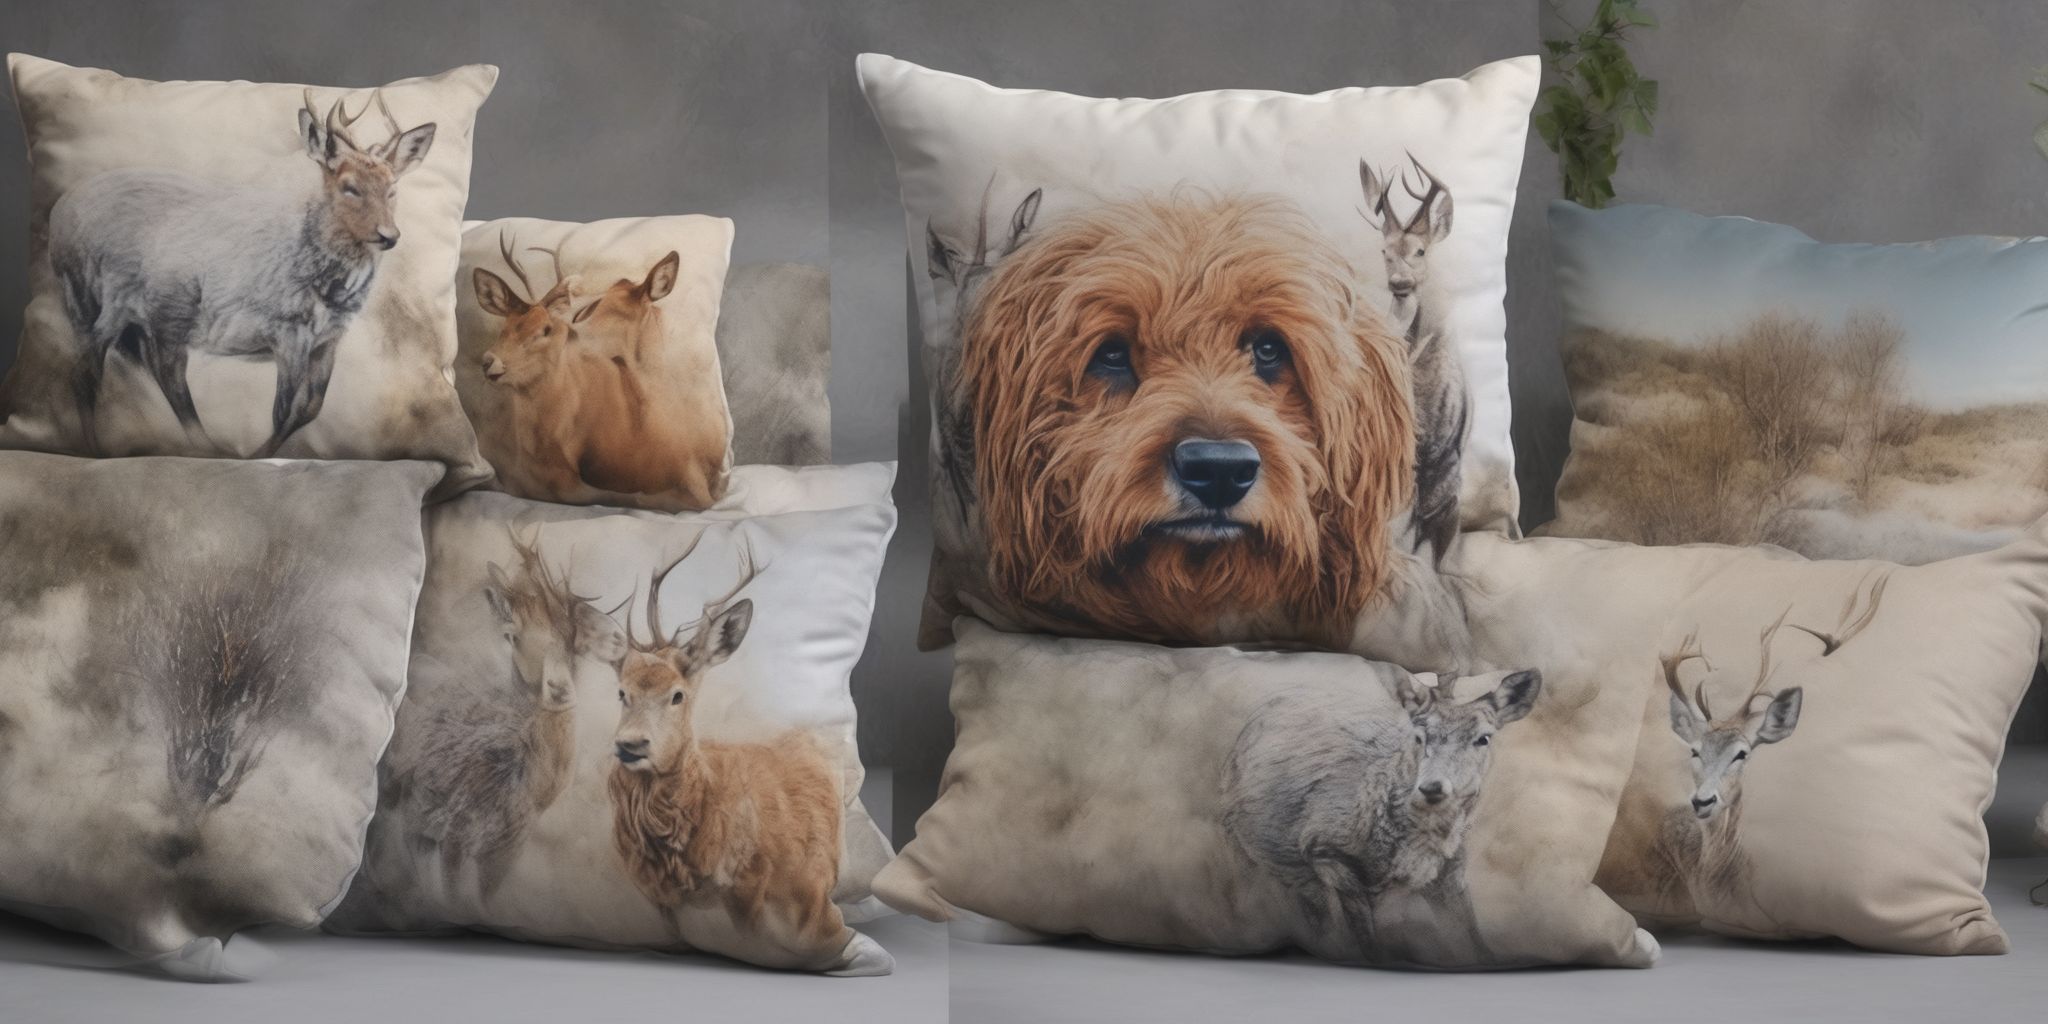 Cushion  in realistic, photographic style